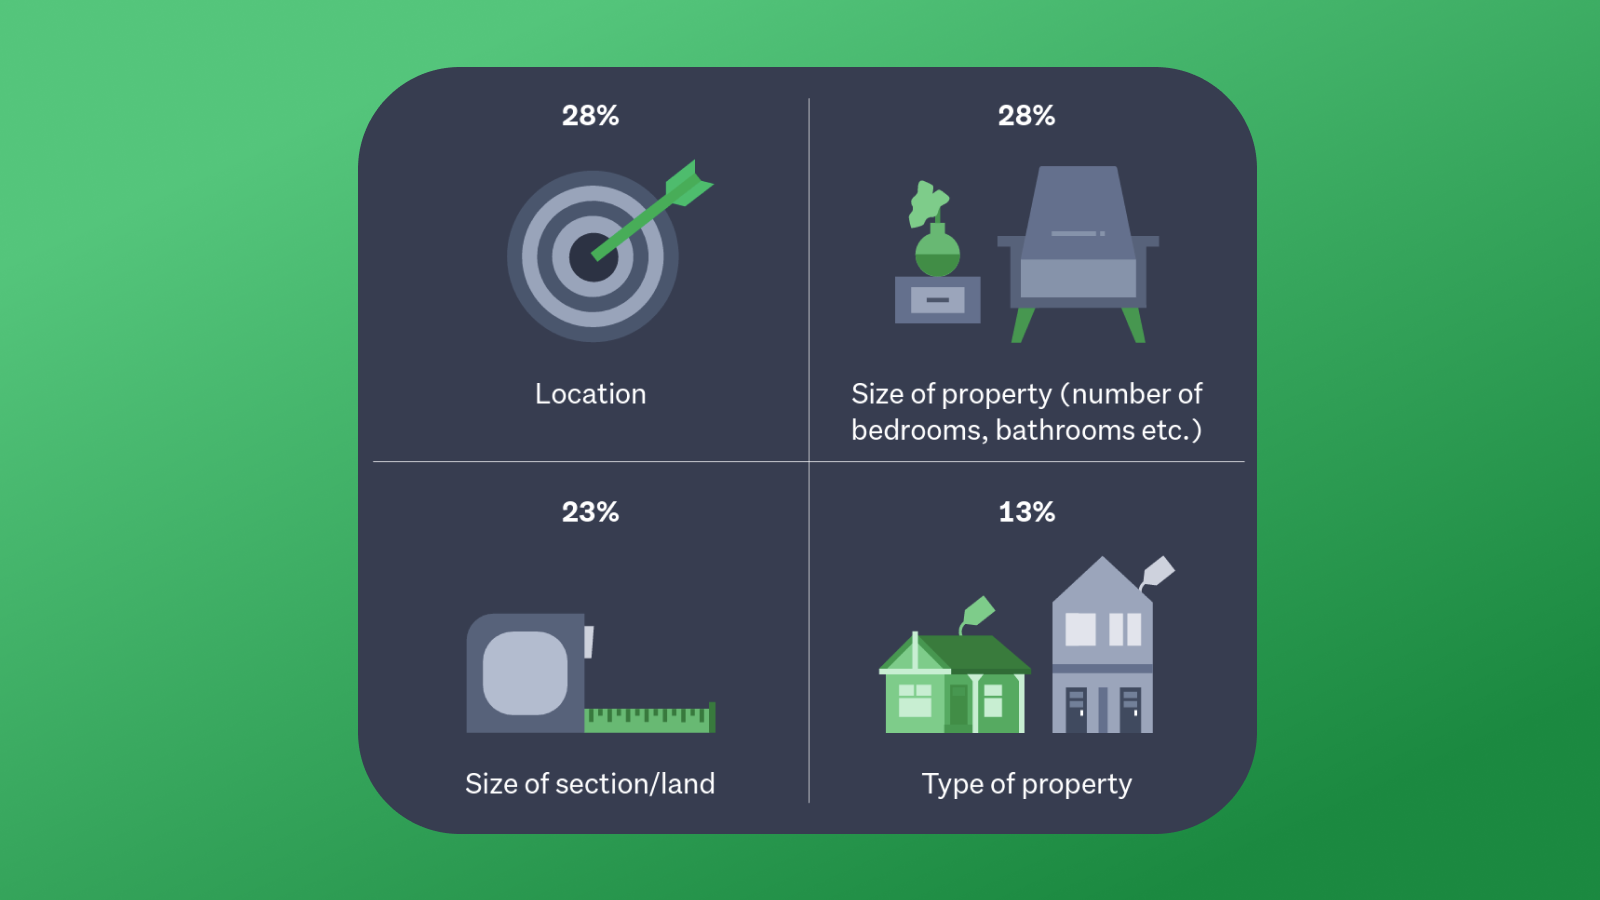 Report results showing people are willing to compromise on location (28%), size of property and number of bedrooms and bathrooms (28%), size of section or land (23%) and type of property (13%).